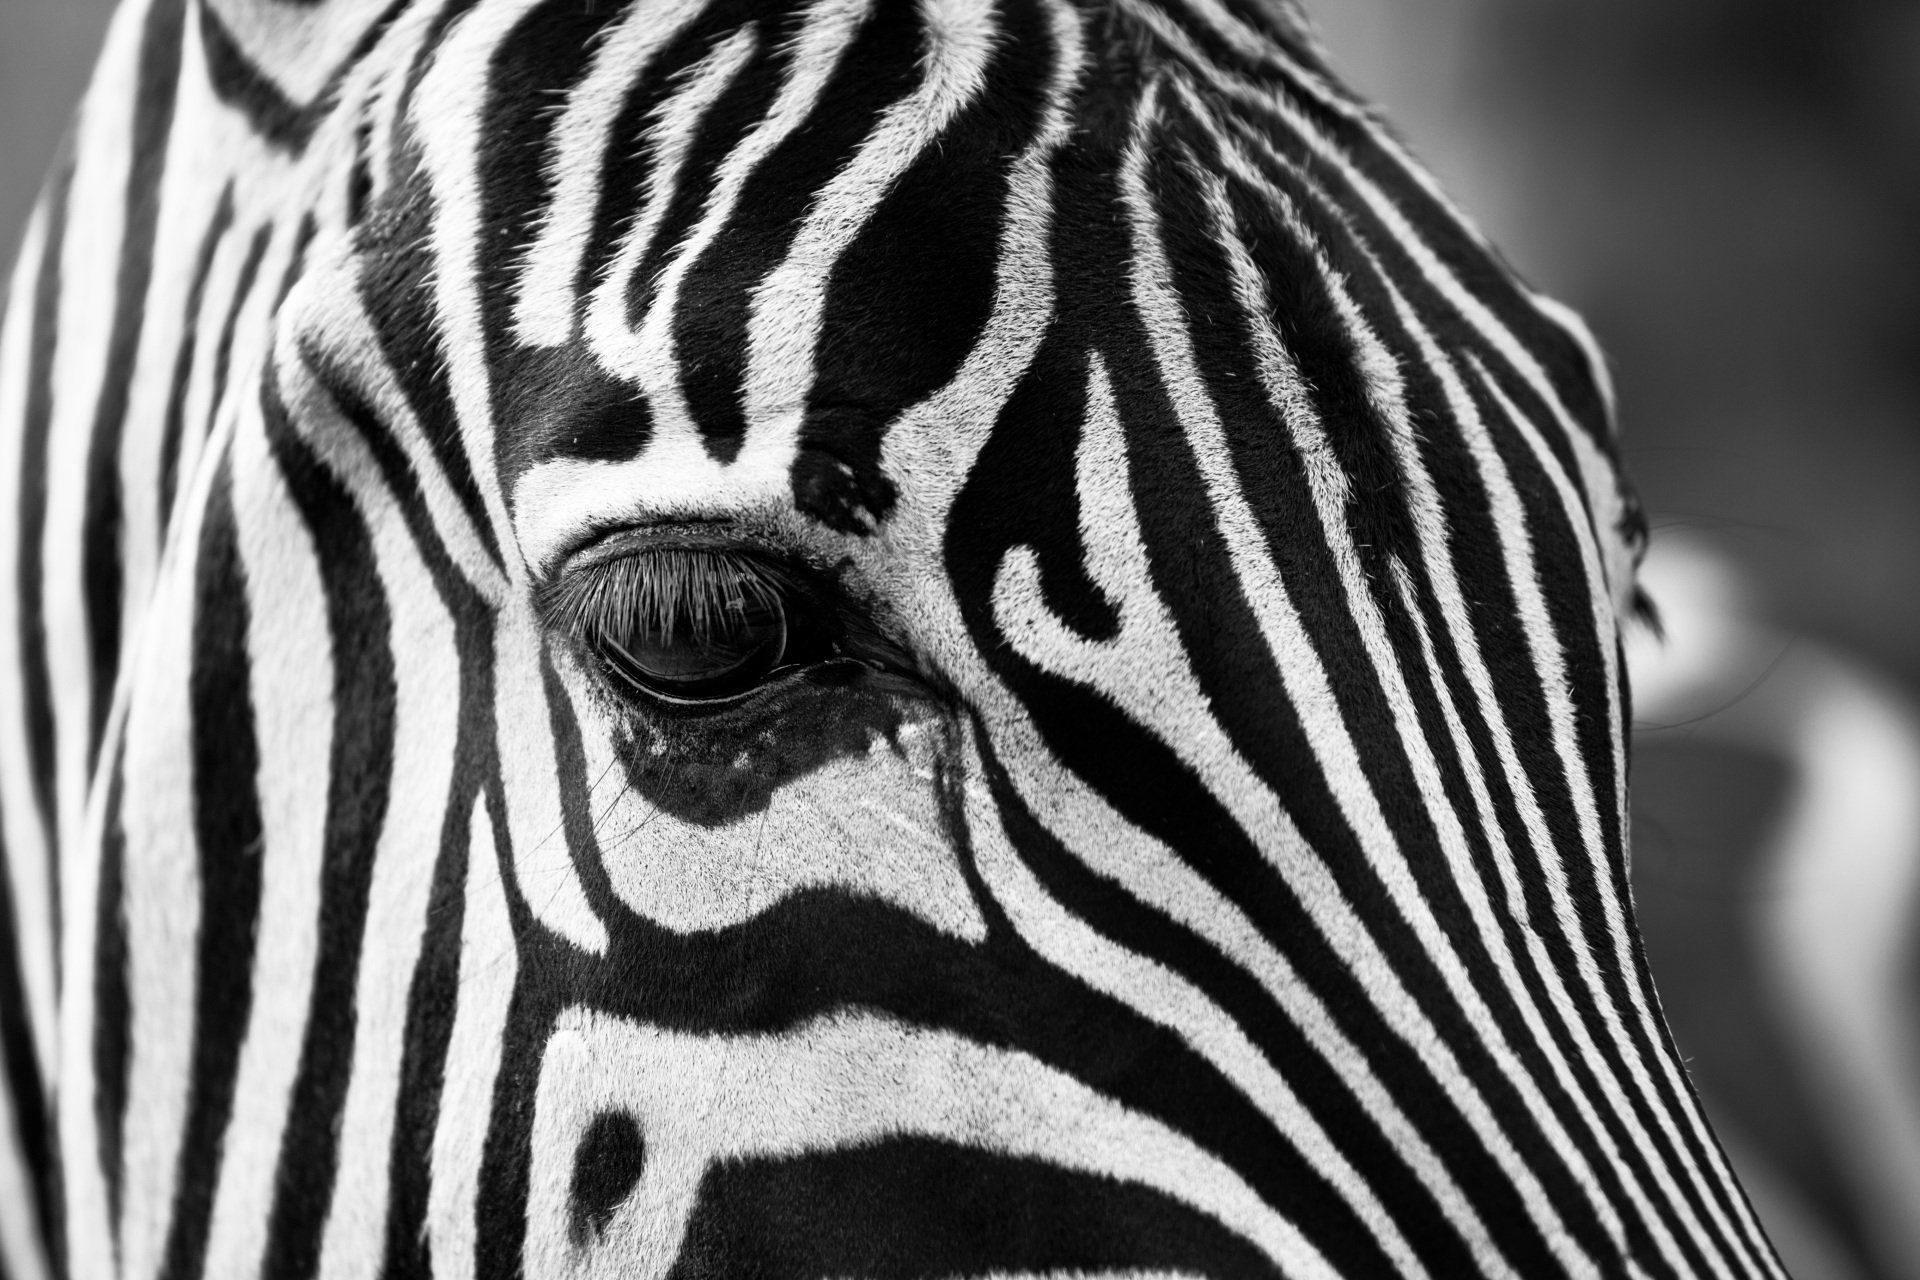 A black and white photo of a zebra 's face